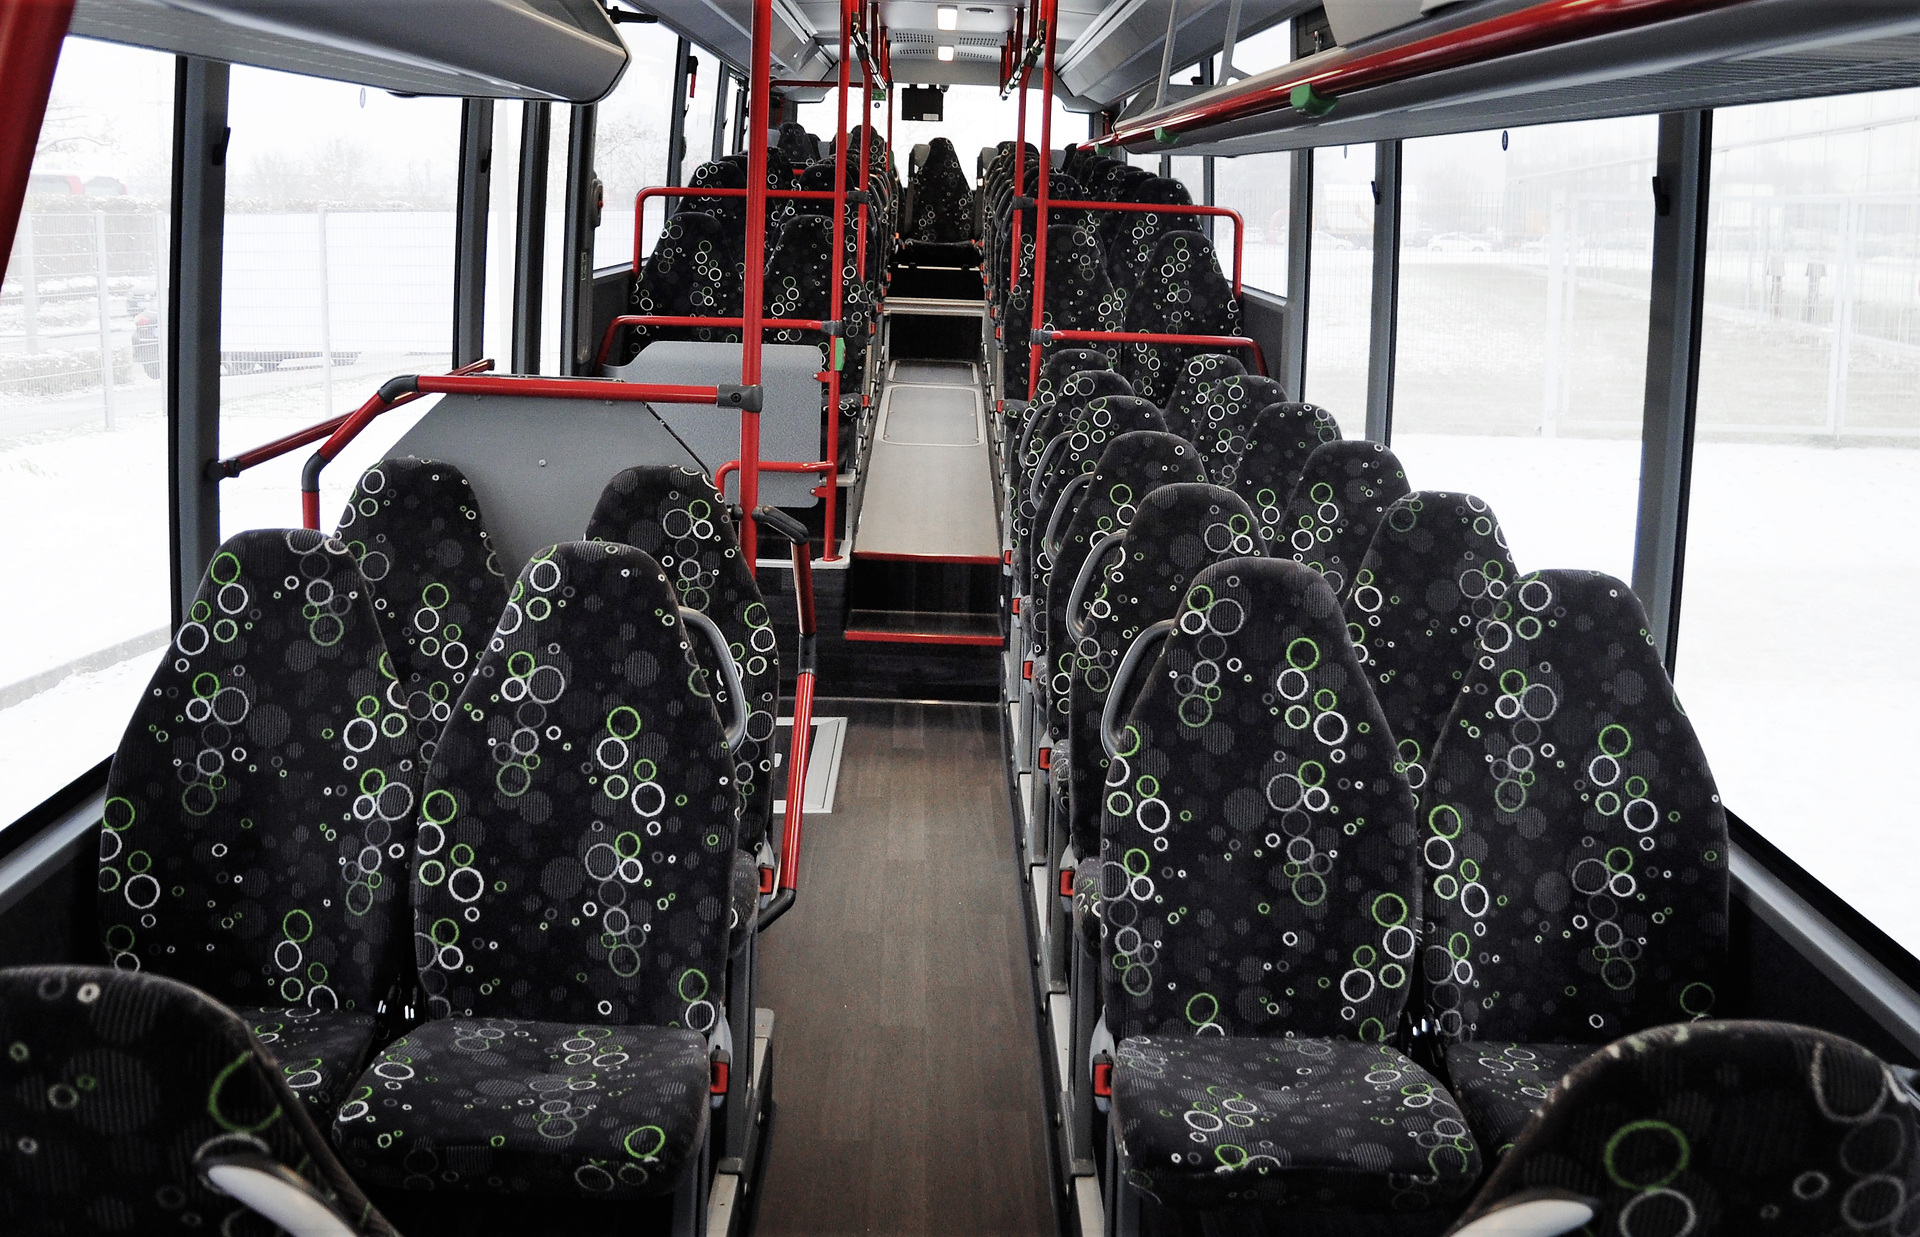 39 Setra Low Entry buses for vehicle fleets in Saxony and Thuringia